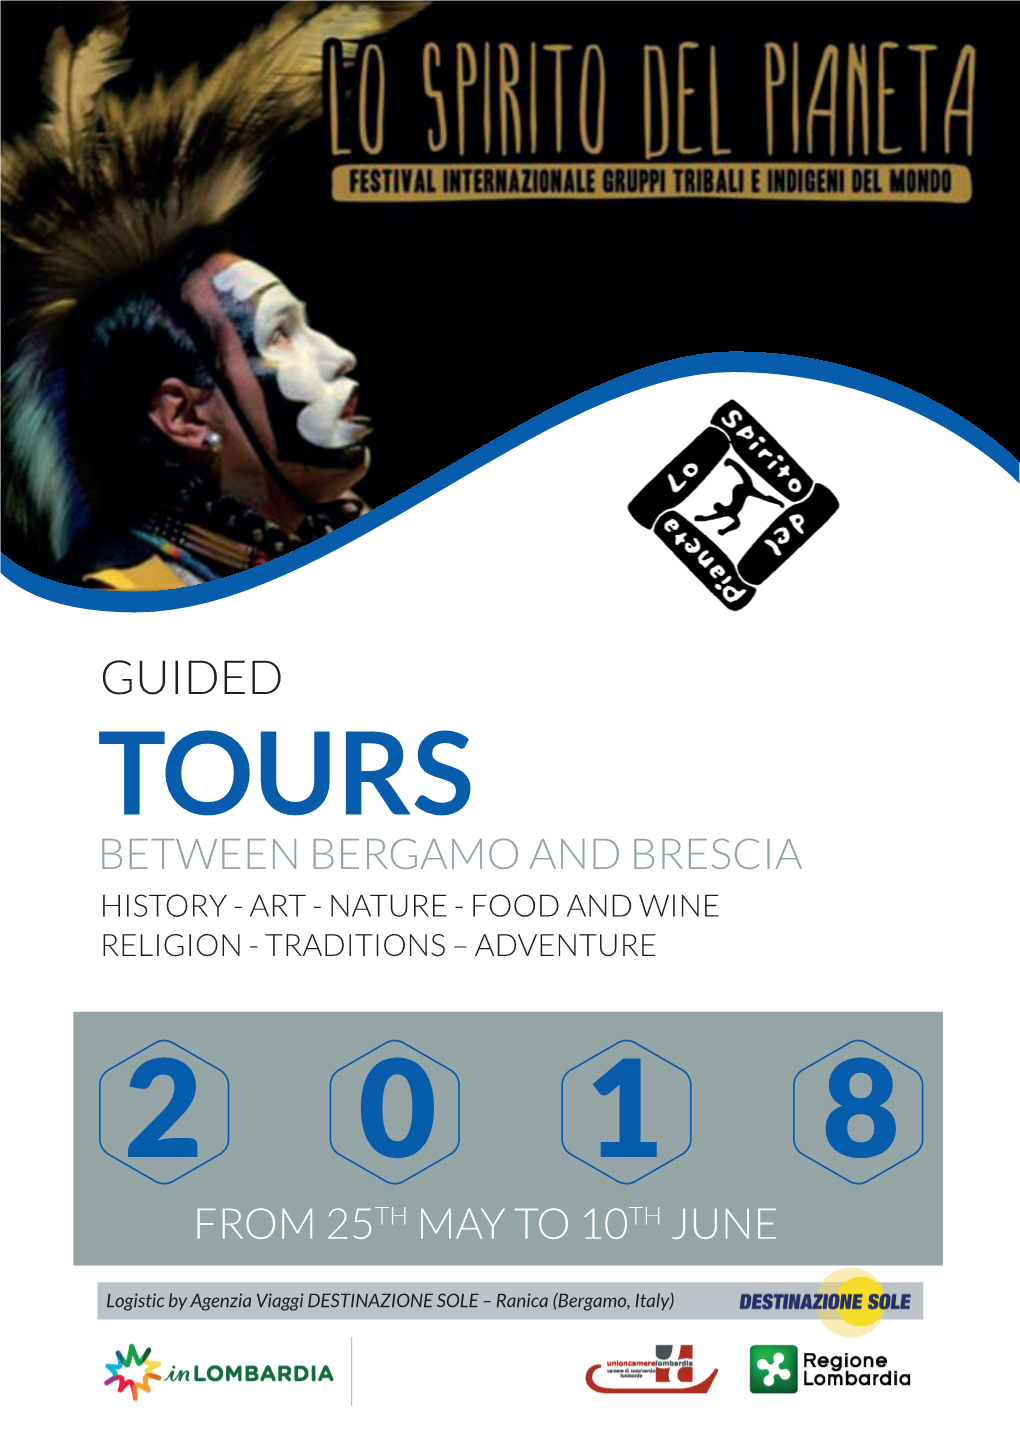 Guided Tours Between Bergamo and Brescia History - Art - Nature - Food and Wine Religion - Traditions – Adventure 2 0 1 8 from 25Th May to 10Th June